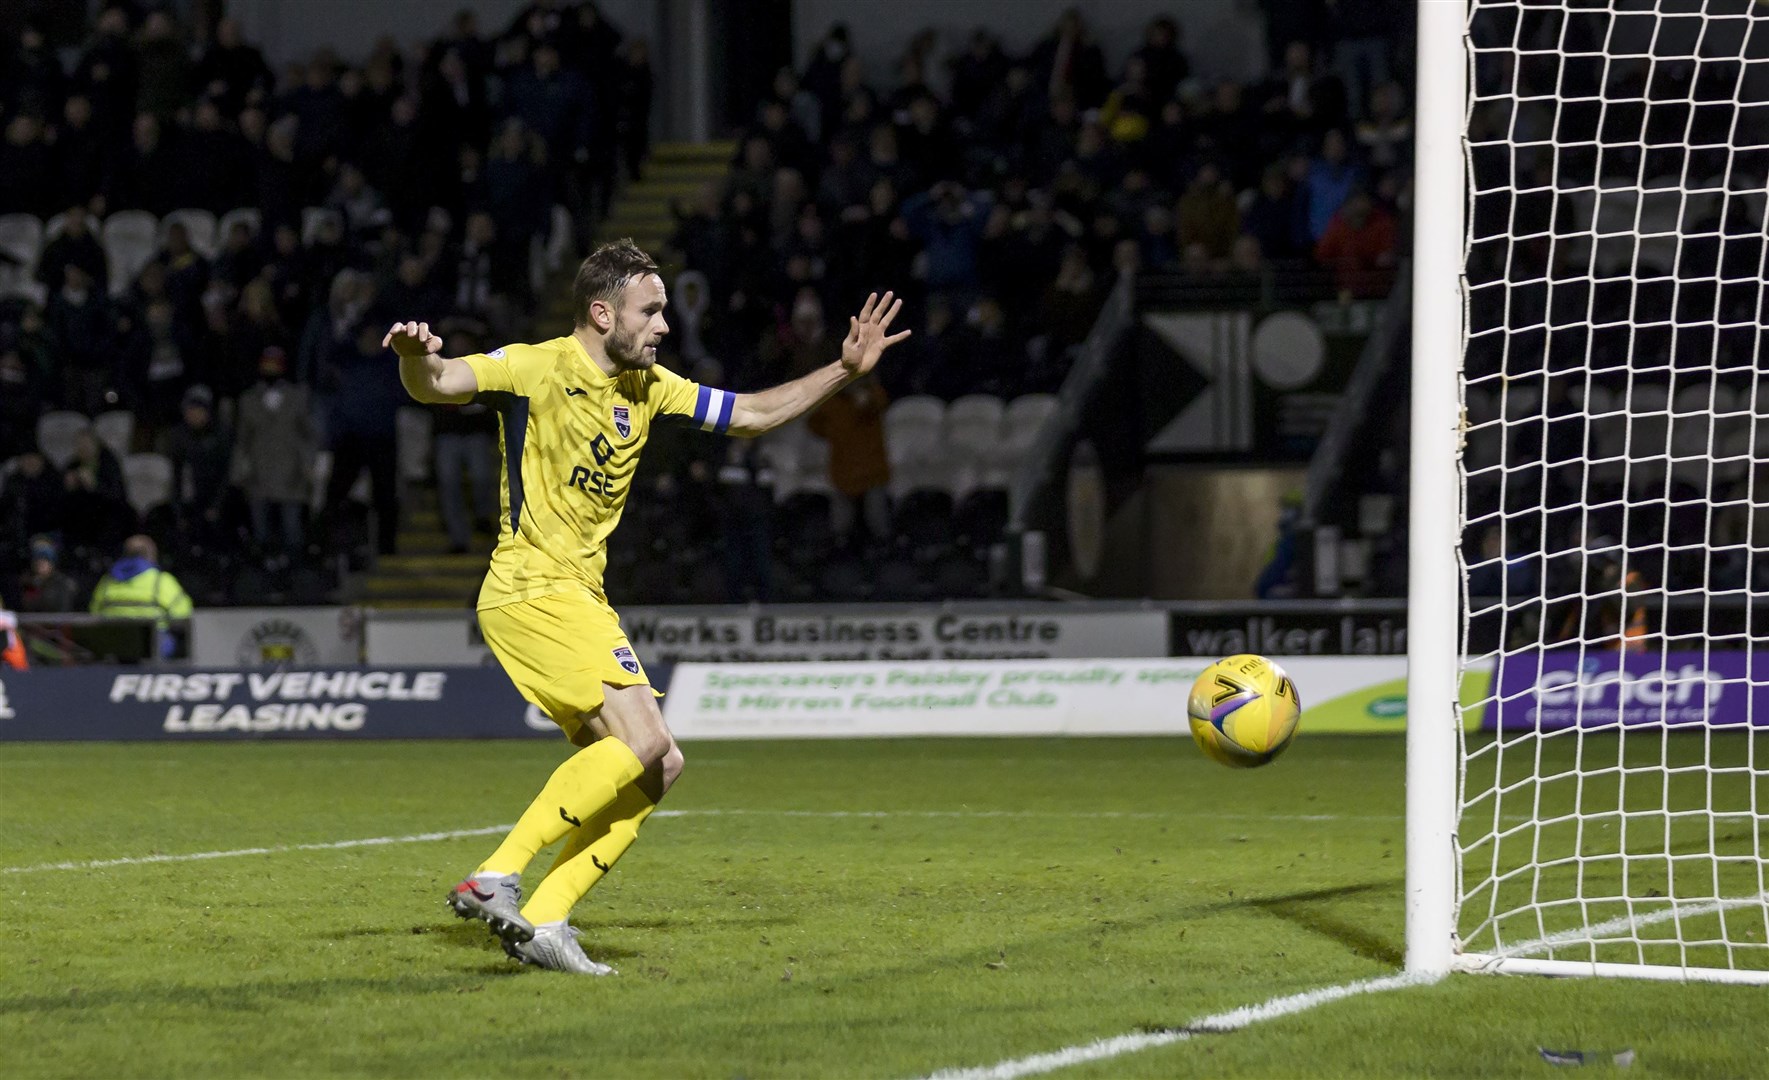 Picture - Ken Macpherson, Inverness. St. Mirren(0) v Ross County(0). 01/12/21. Ross County's Keith Watson clears as shot from St.Mirren's Curtis Main off the line.